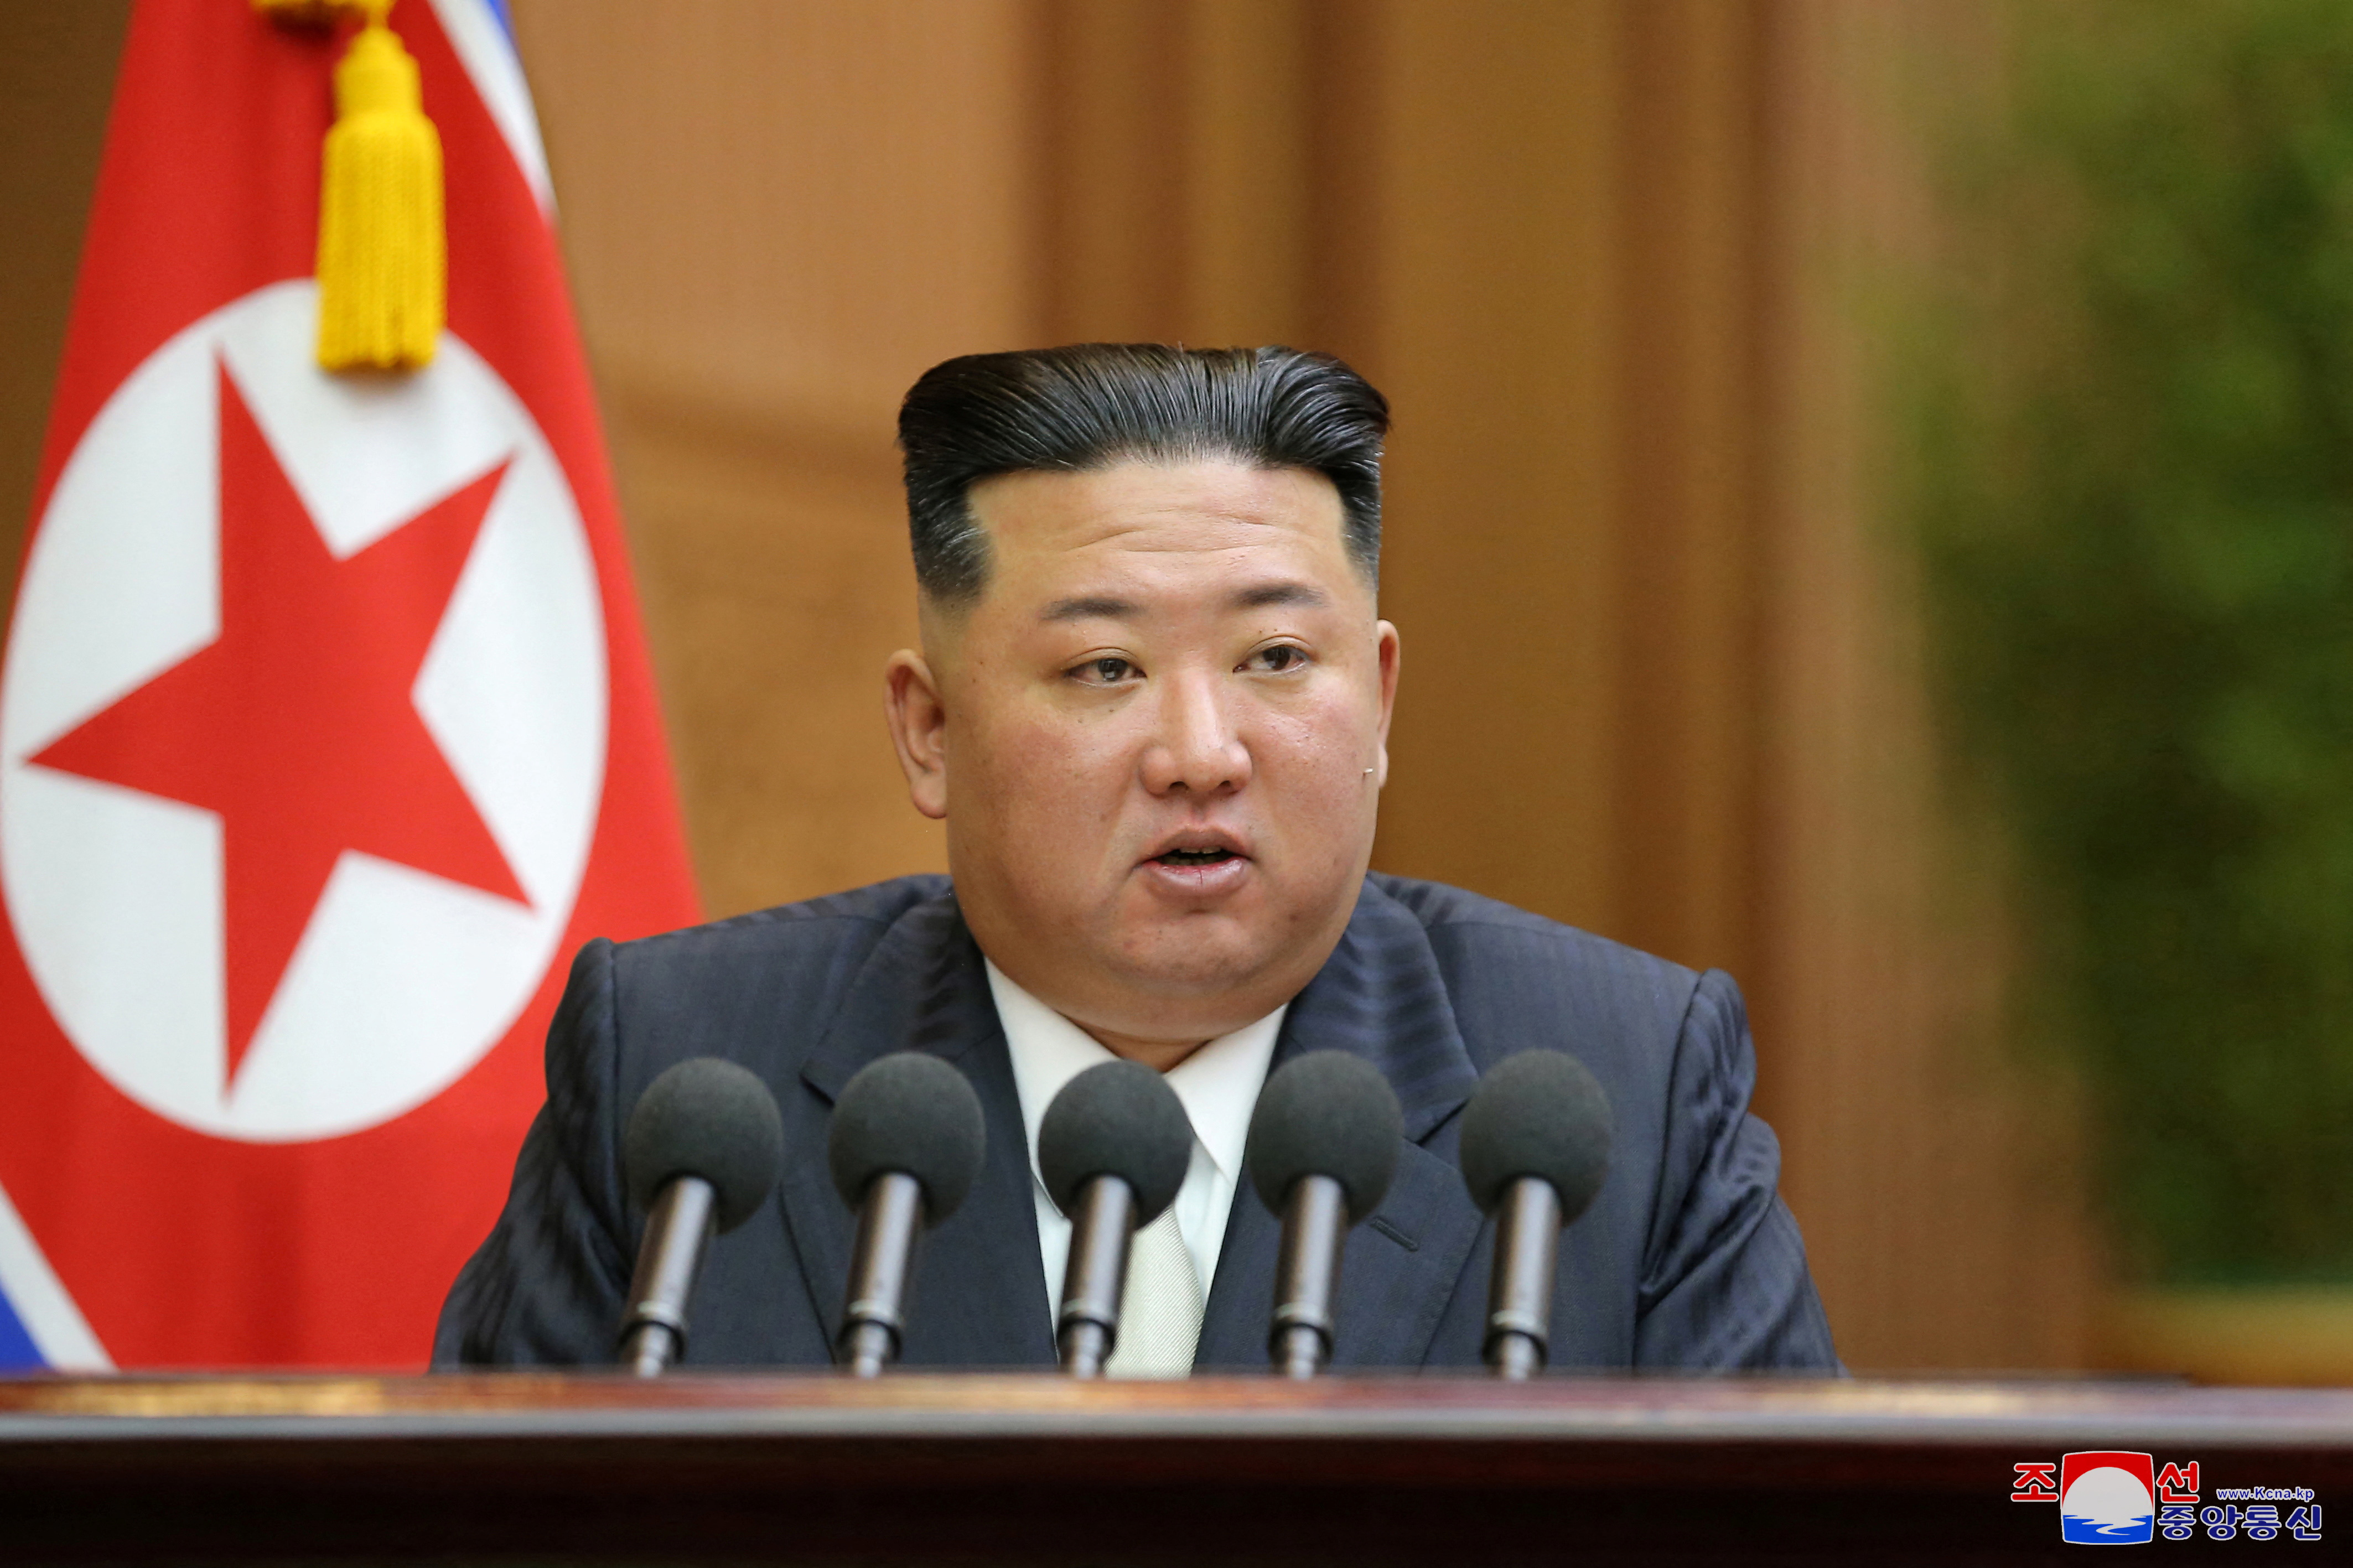 North Korea's Supreme People's Assembly opens in Pyongyang